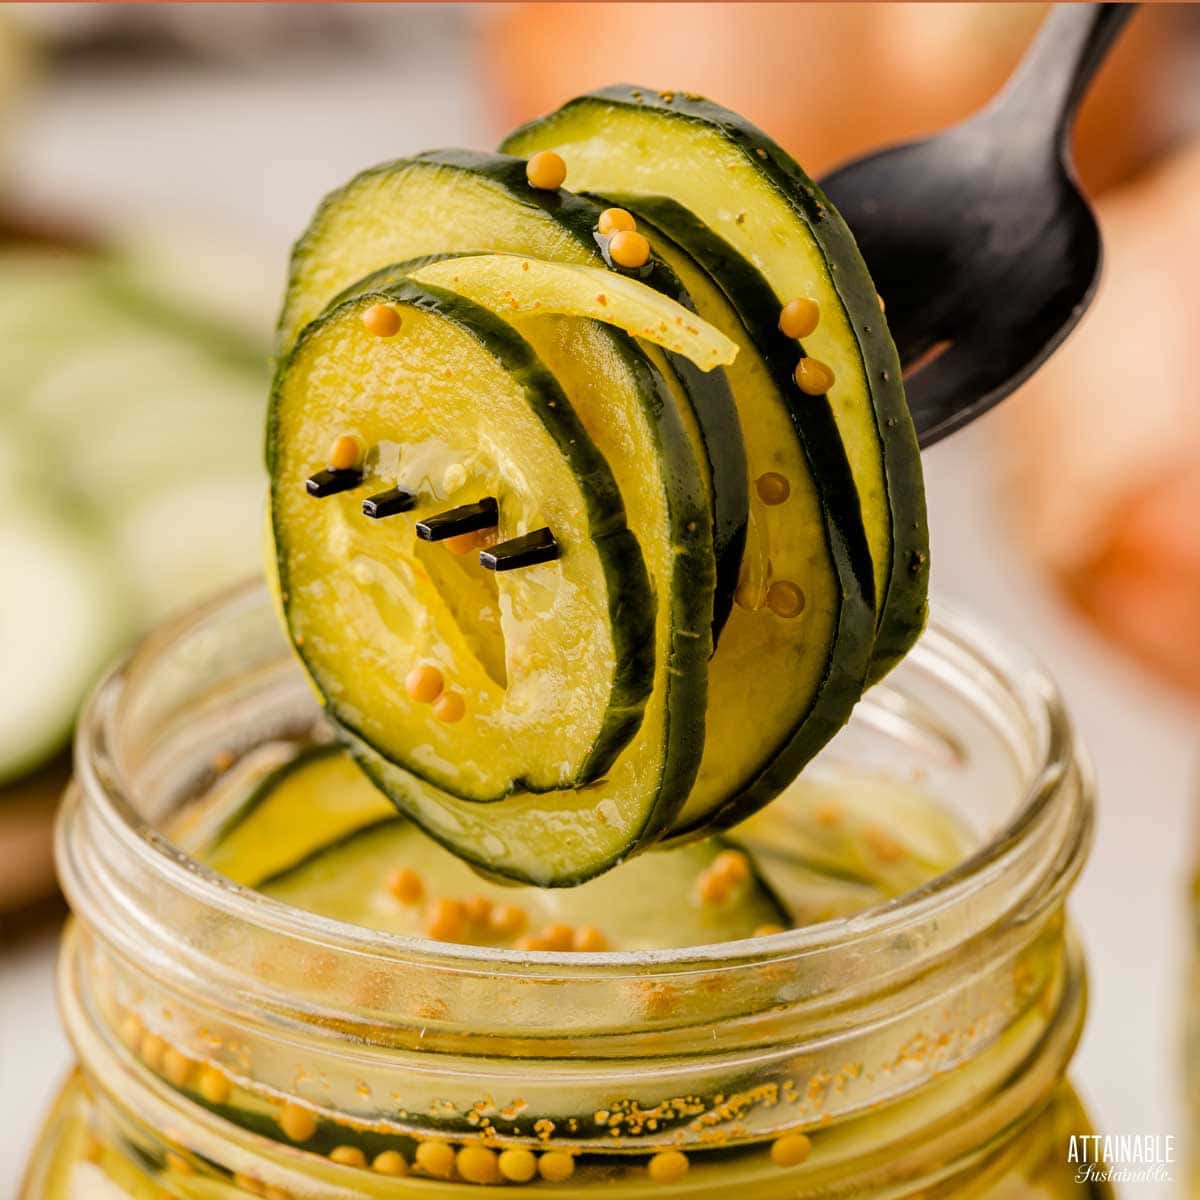 How to Make Quick Pickles with a Food Processor